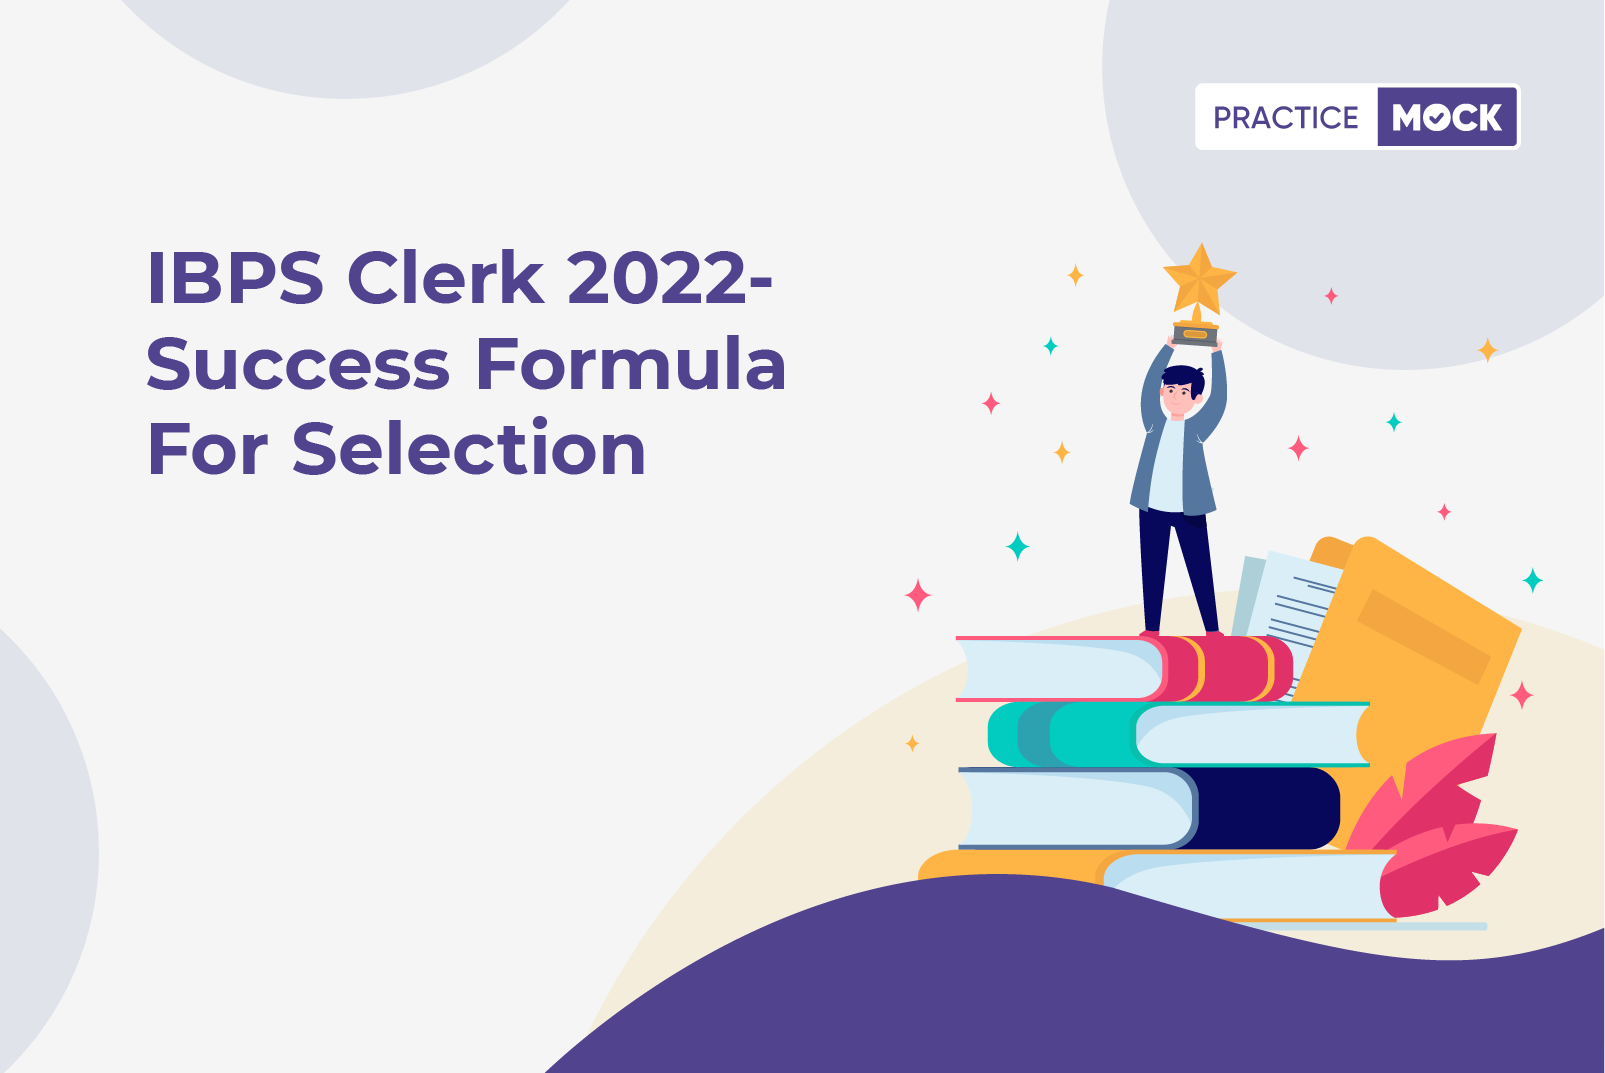 How to crack IBPS Clerk 2022 Exam in 1st Attempt?